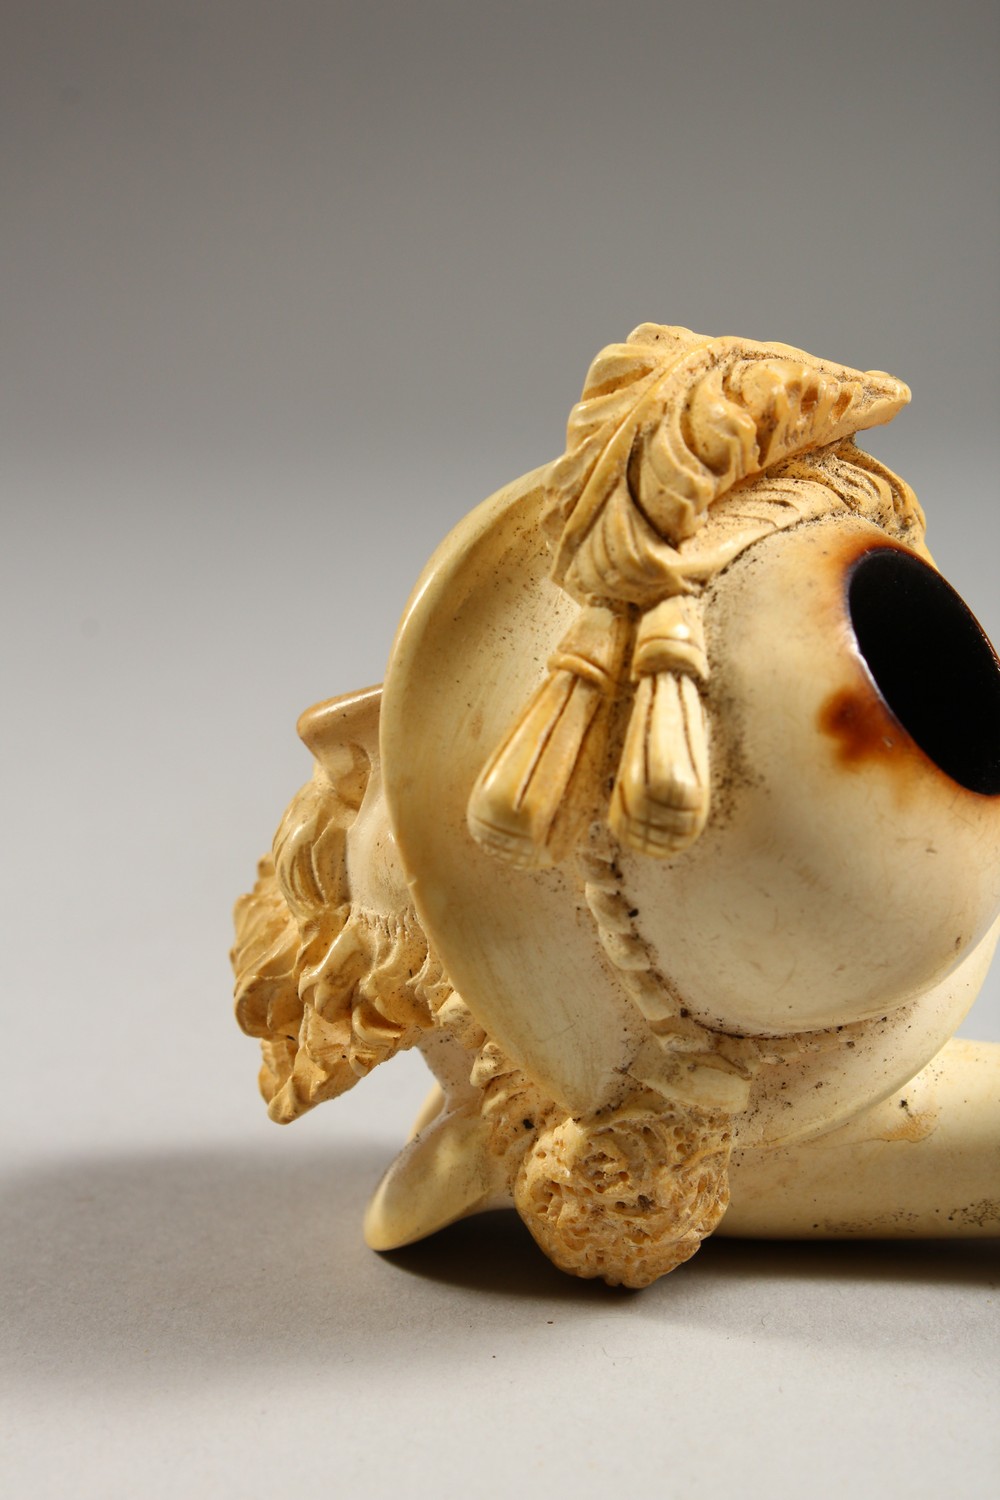 A VERY GOOD MEERSCHAUM PIPE, the bowl modelled as a bearded gentleman, in a fitted case. - Image 3 of 14